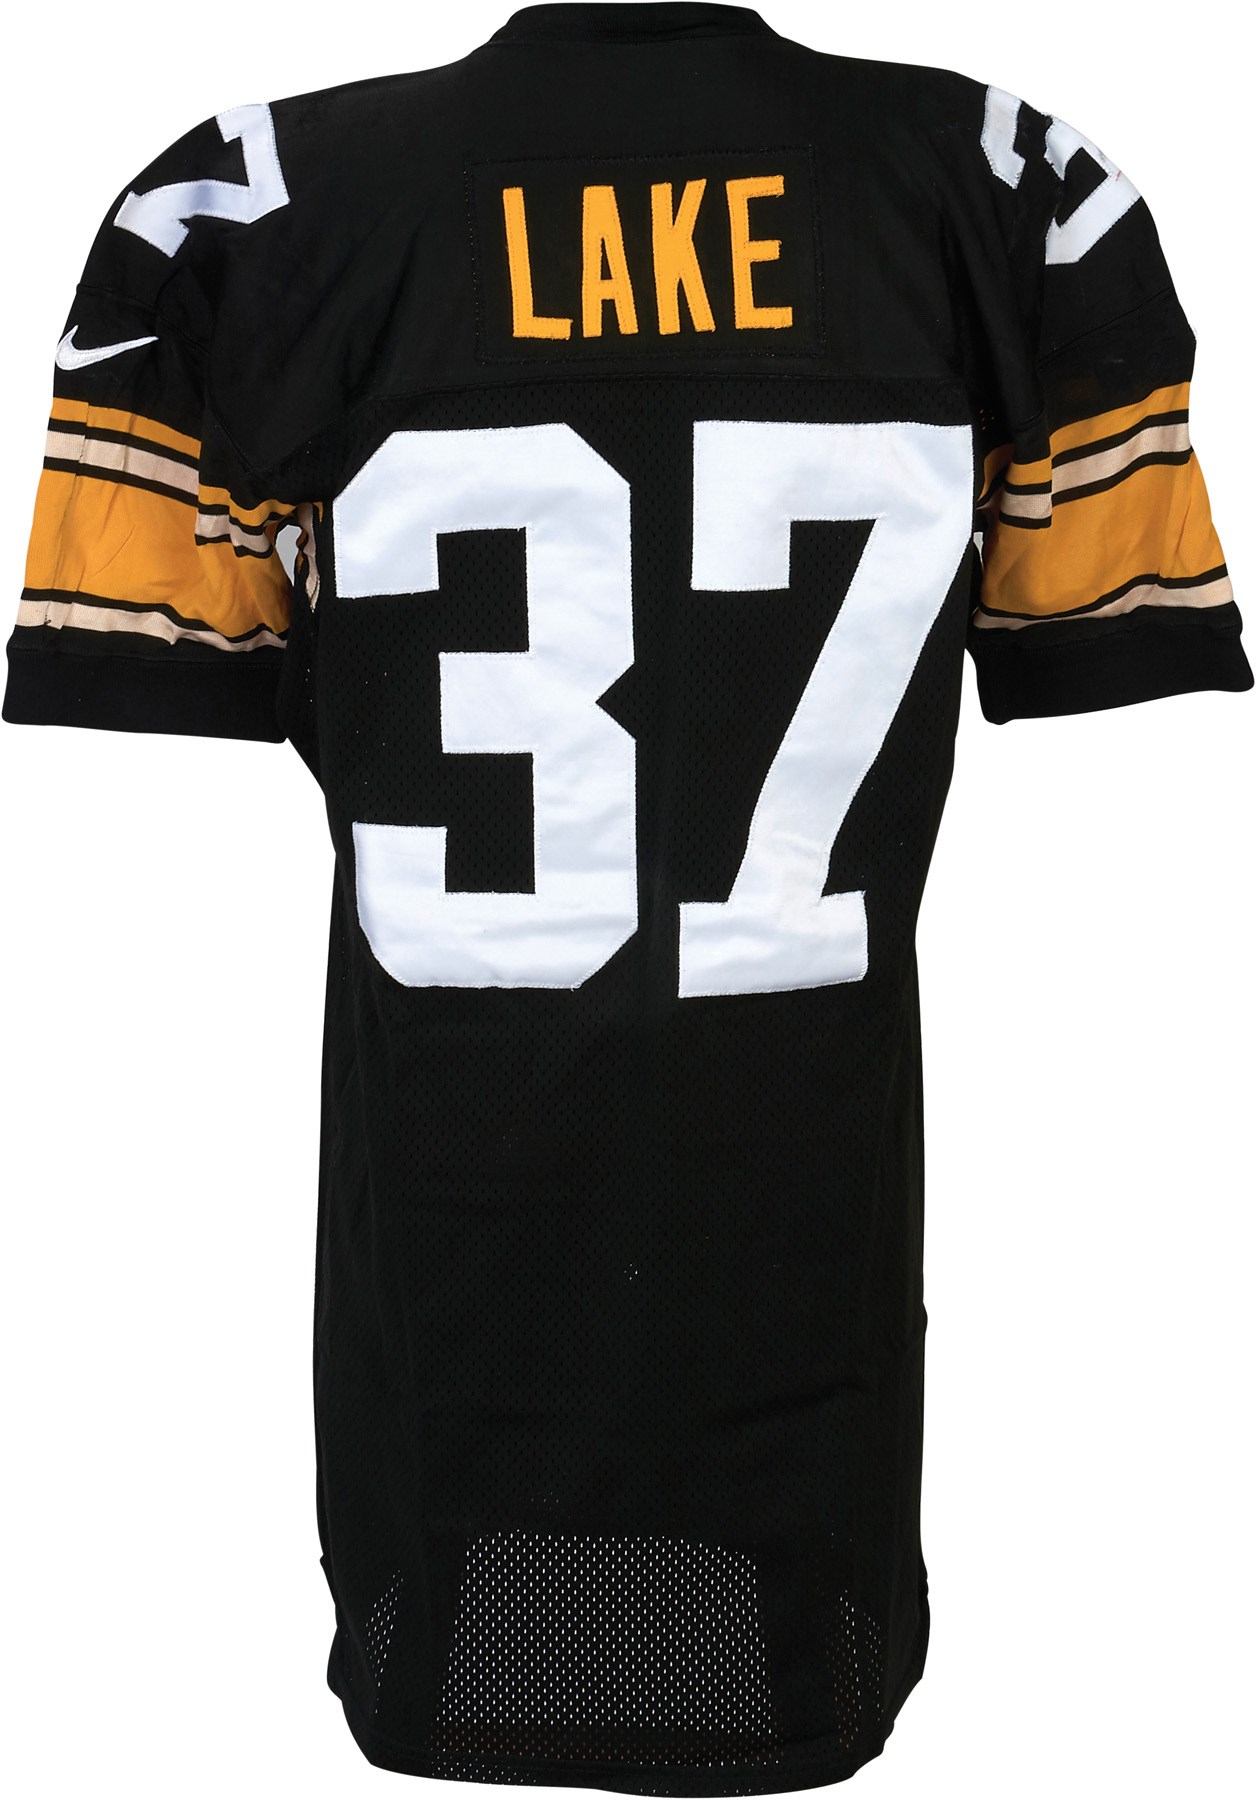 The Pittsburgh Steelers Game Worn Jersey Archive - 1996 Carnell Lake Pittsburgh Steelers Game Worn Jersey (Photo-Matched)